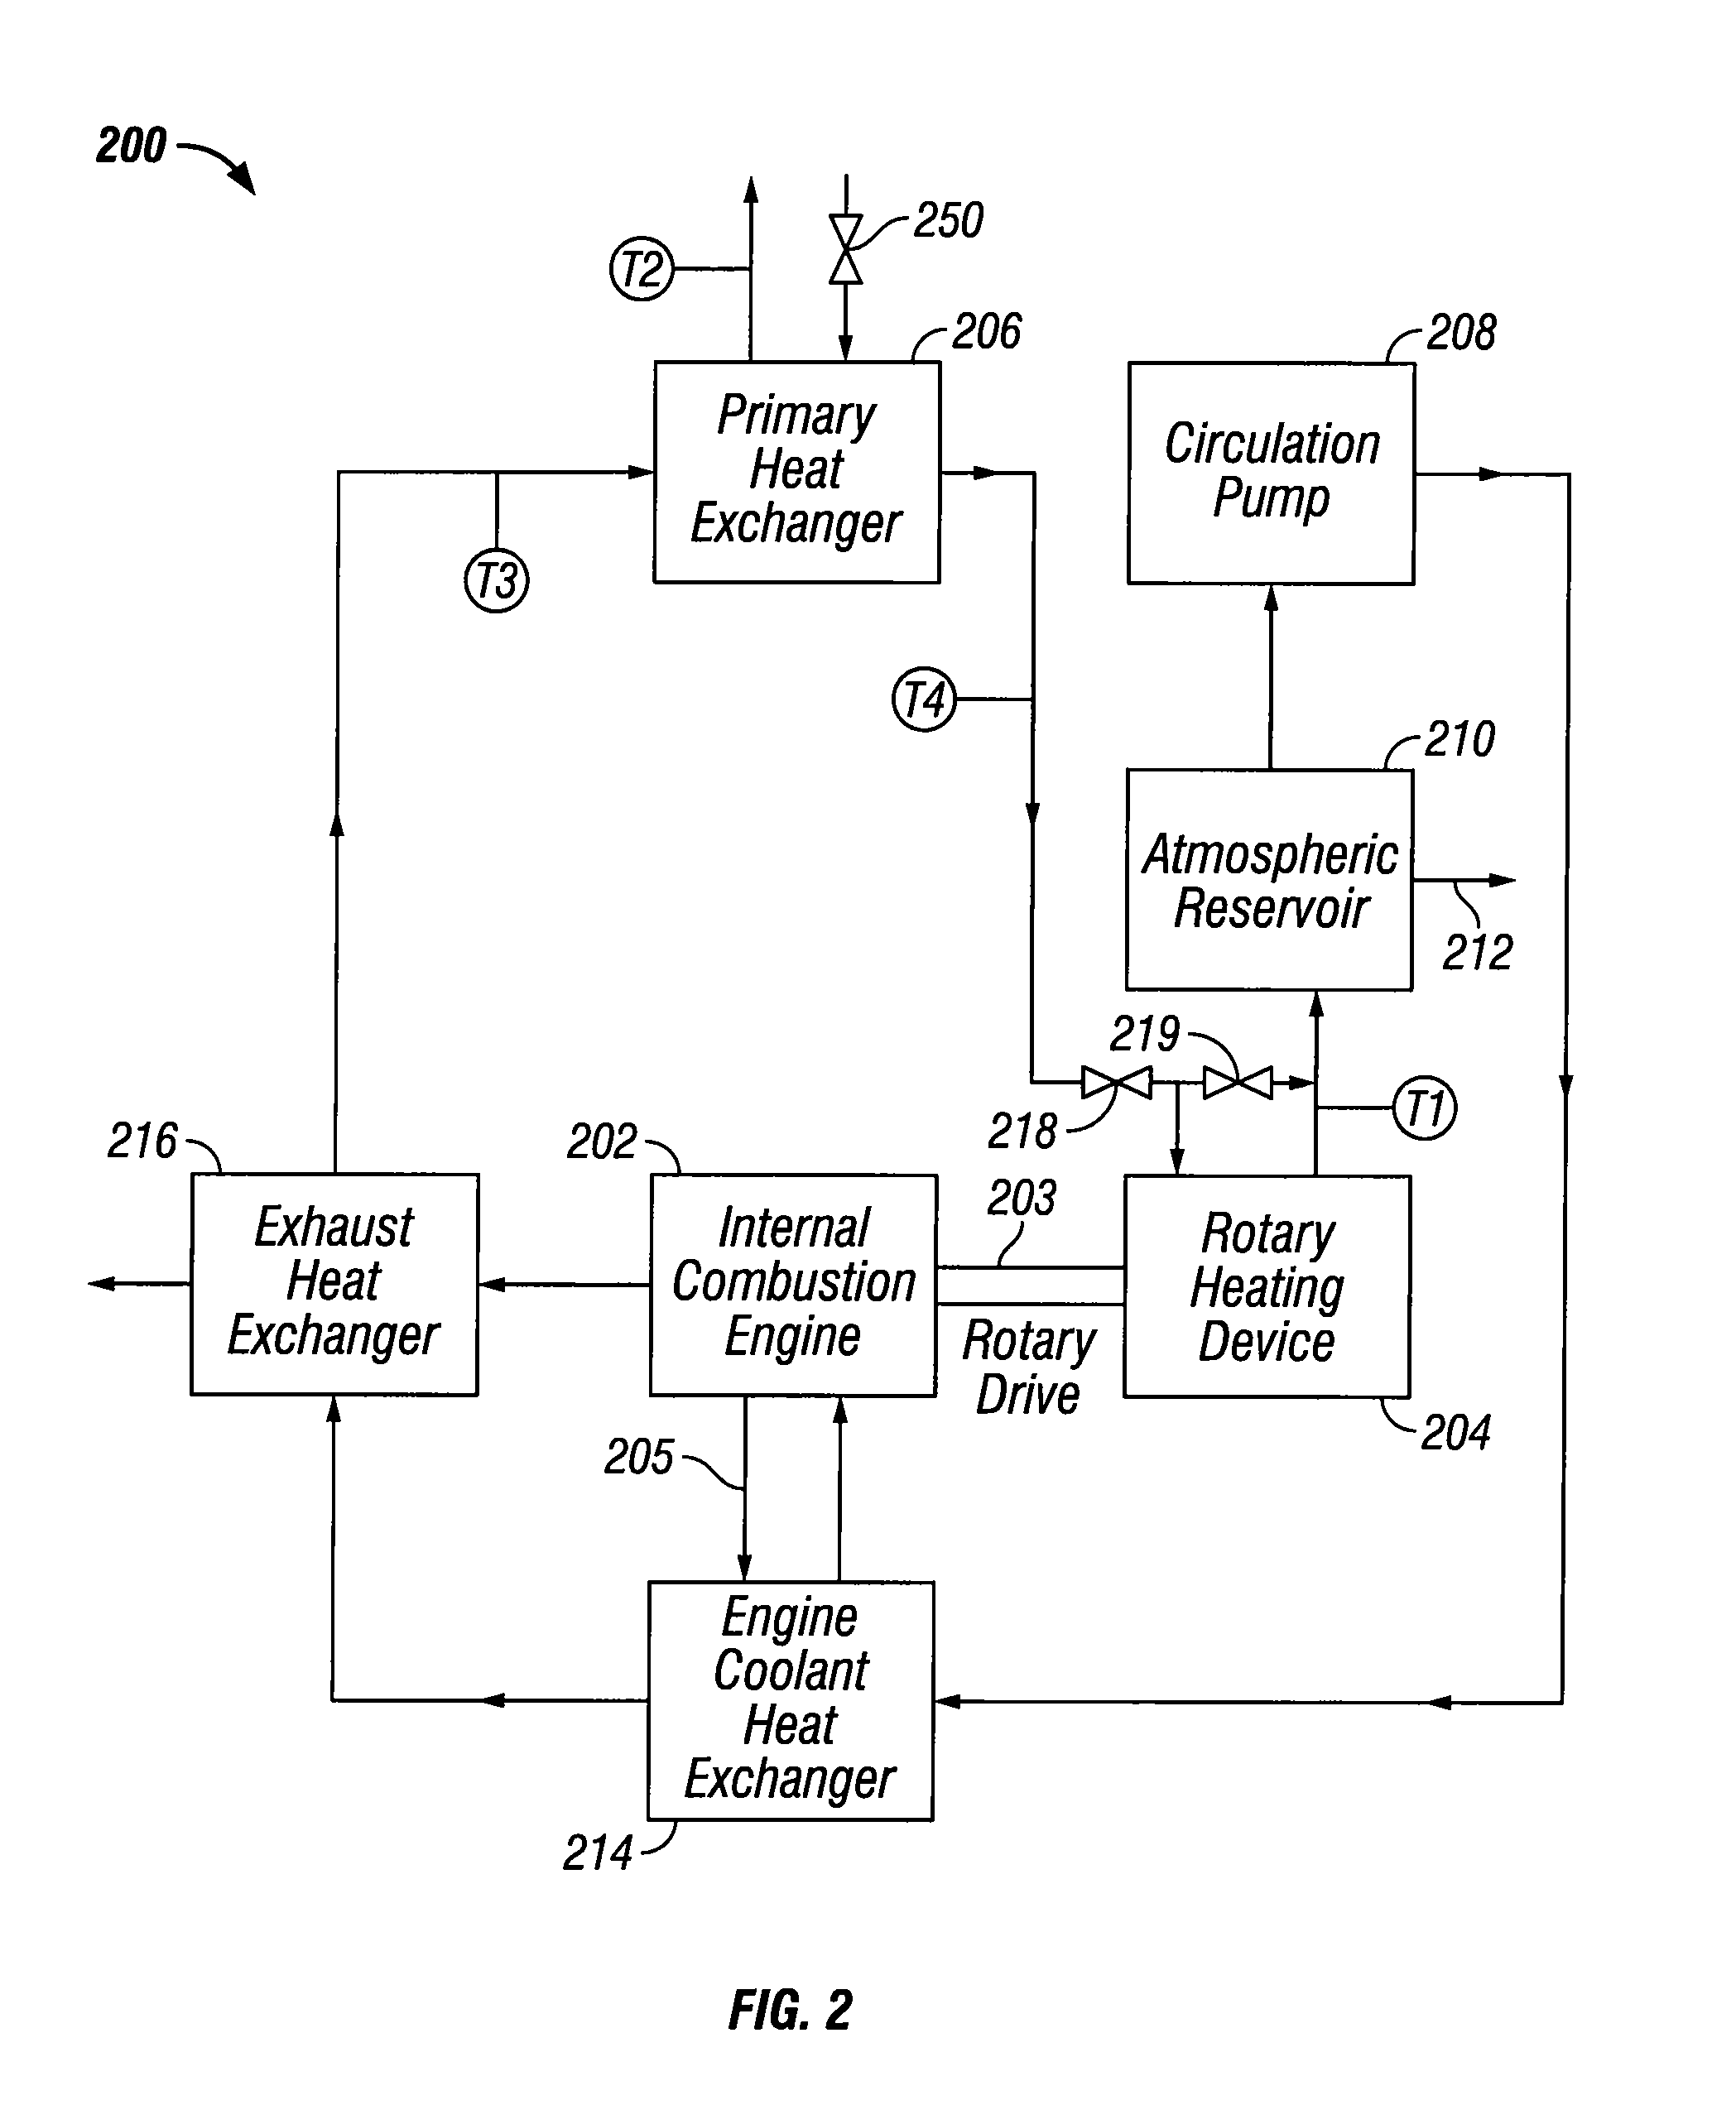 Methods and apparatuses for heating and manipulating fluid